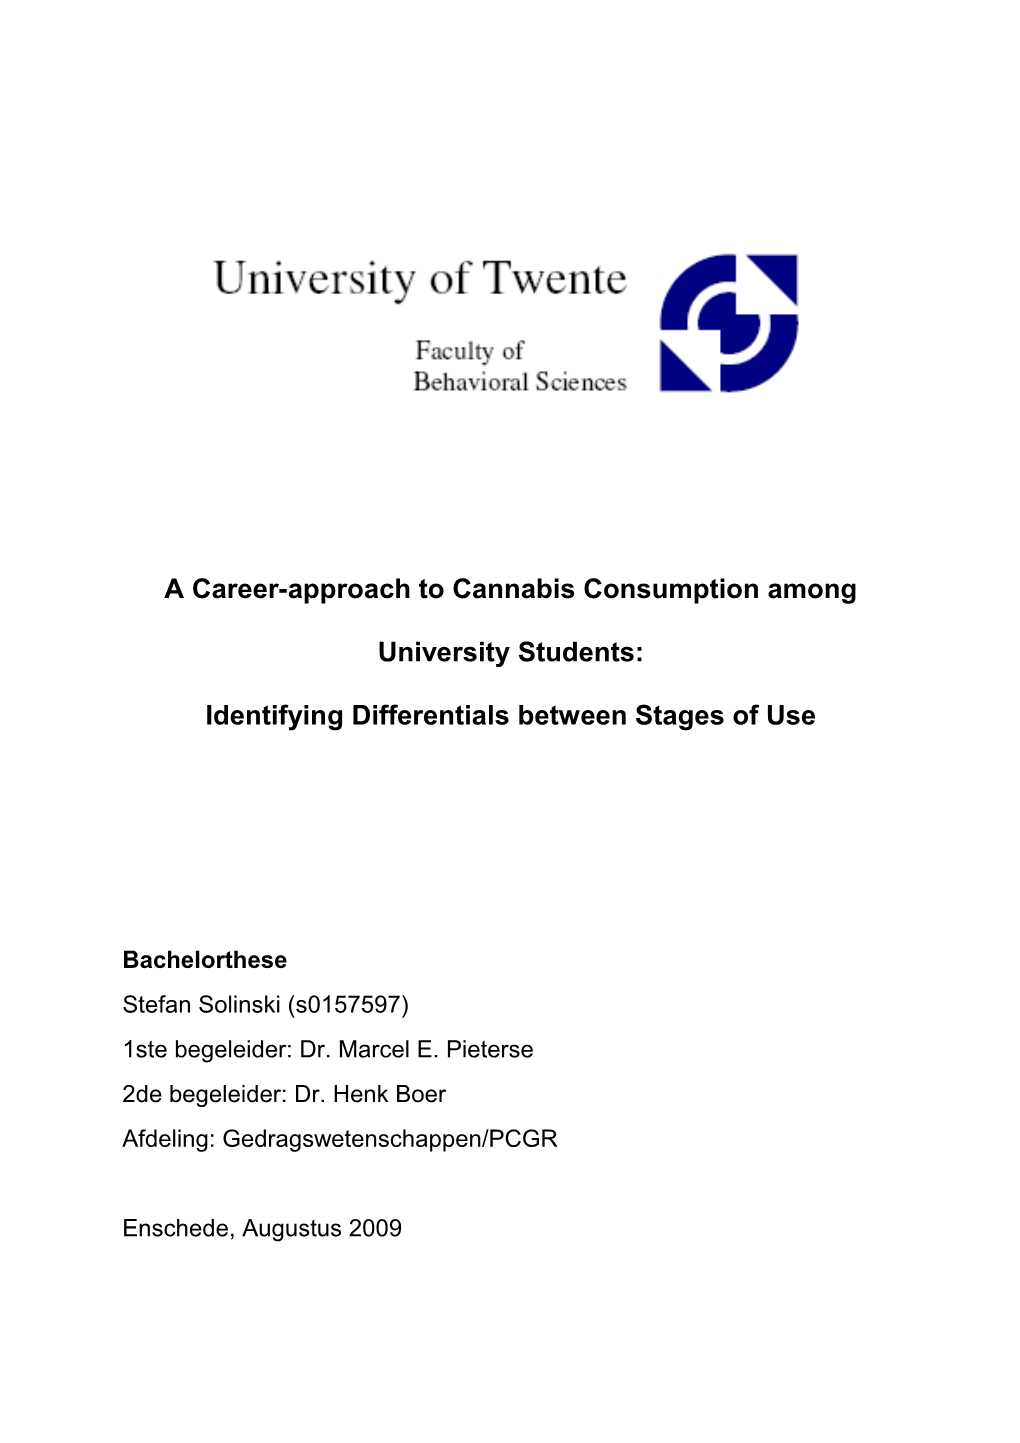 A Career-Approach to Cannabis Consumption Among University Students